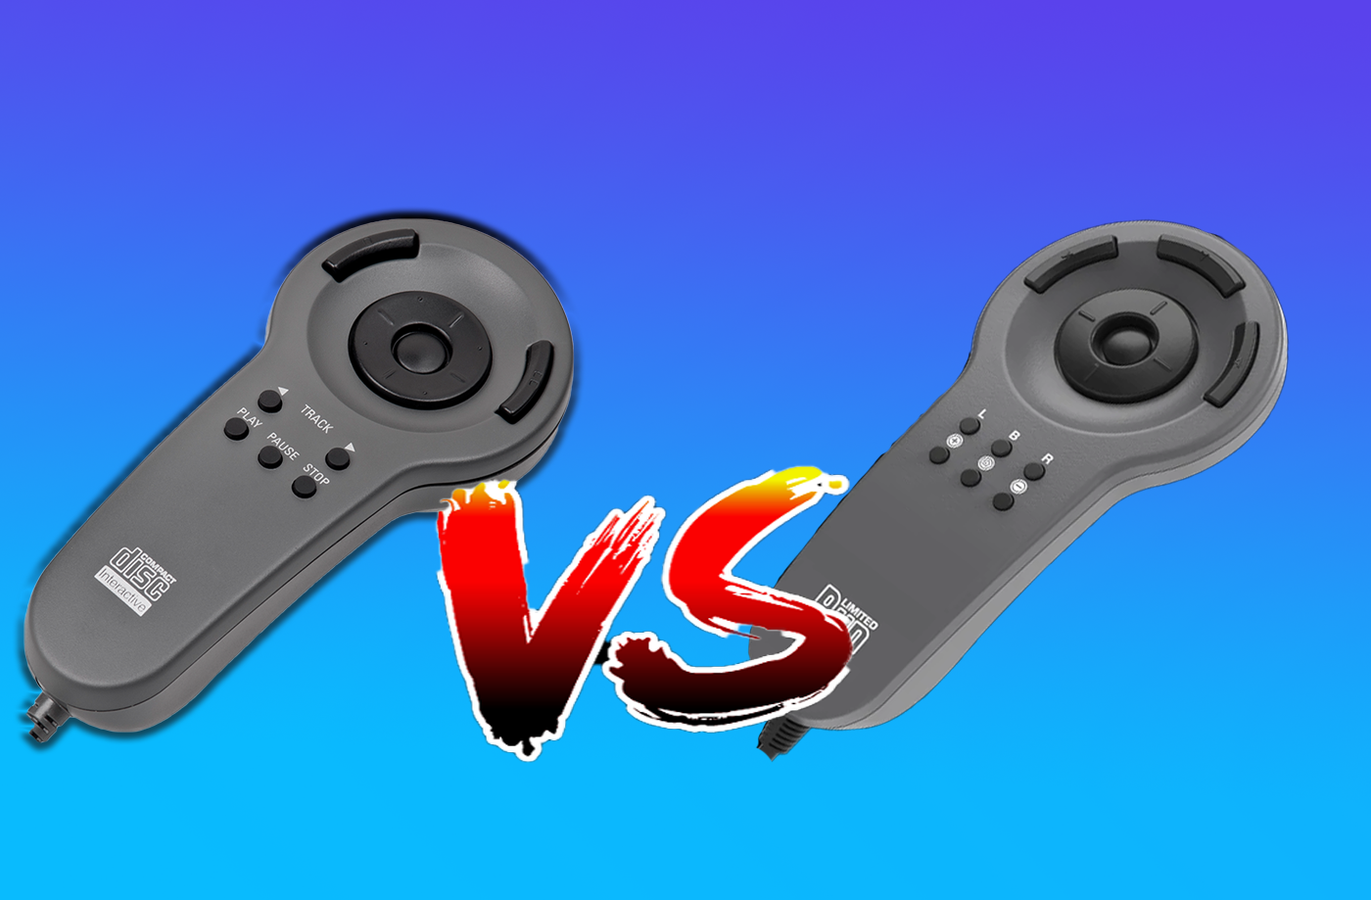 The paddle controller vs the Limited run games controller